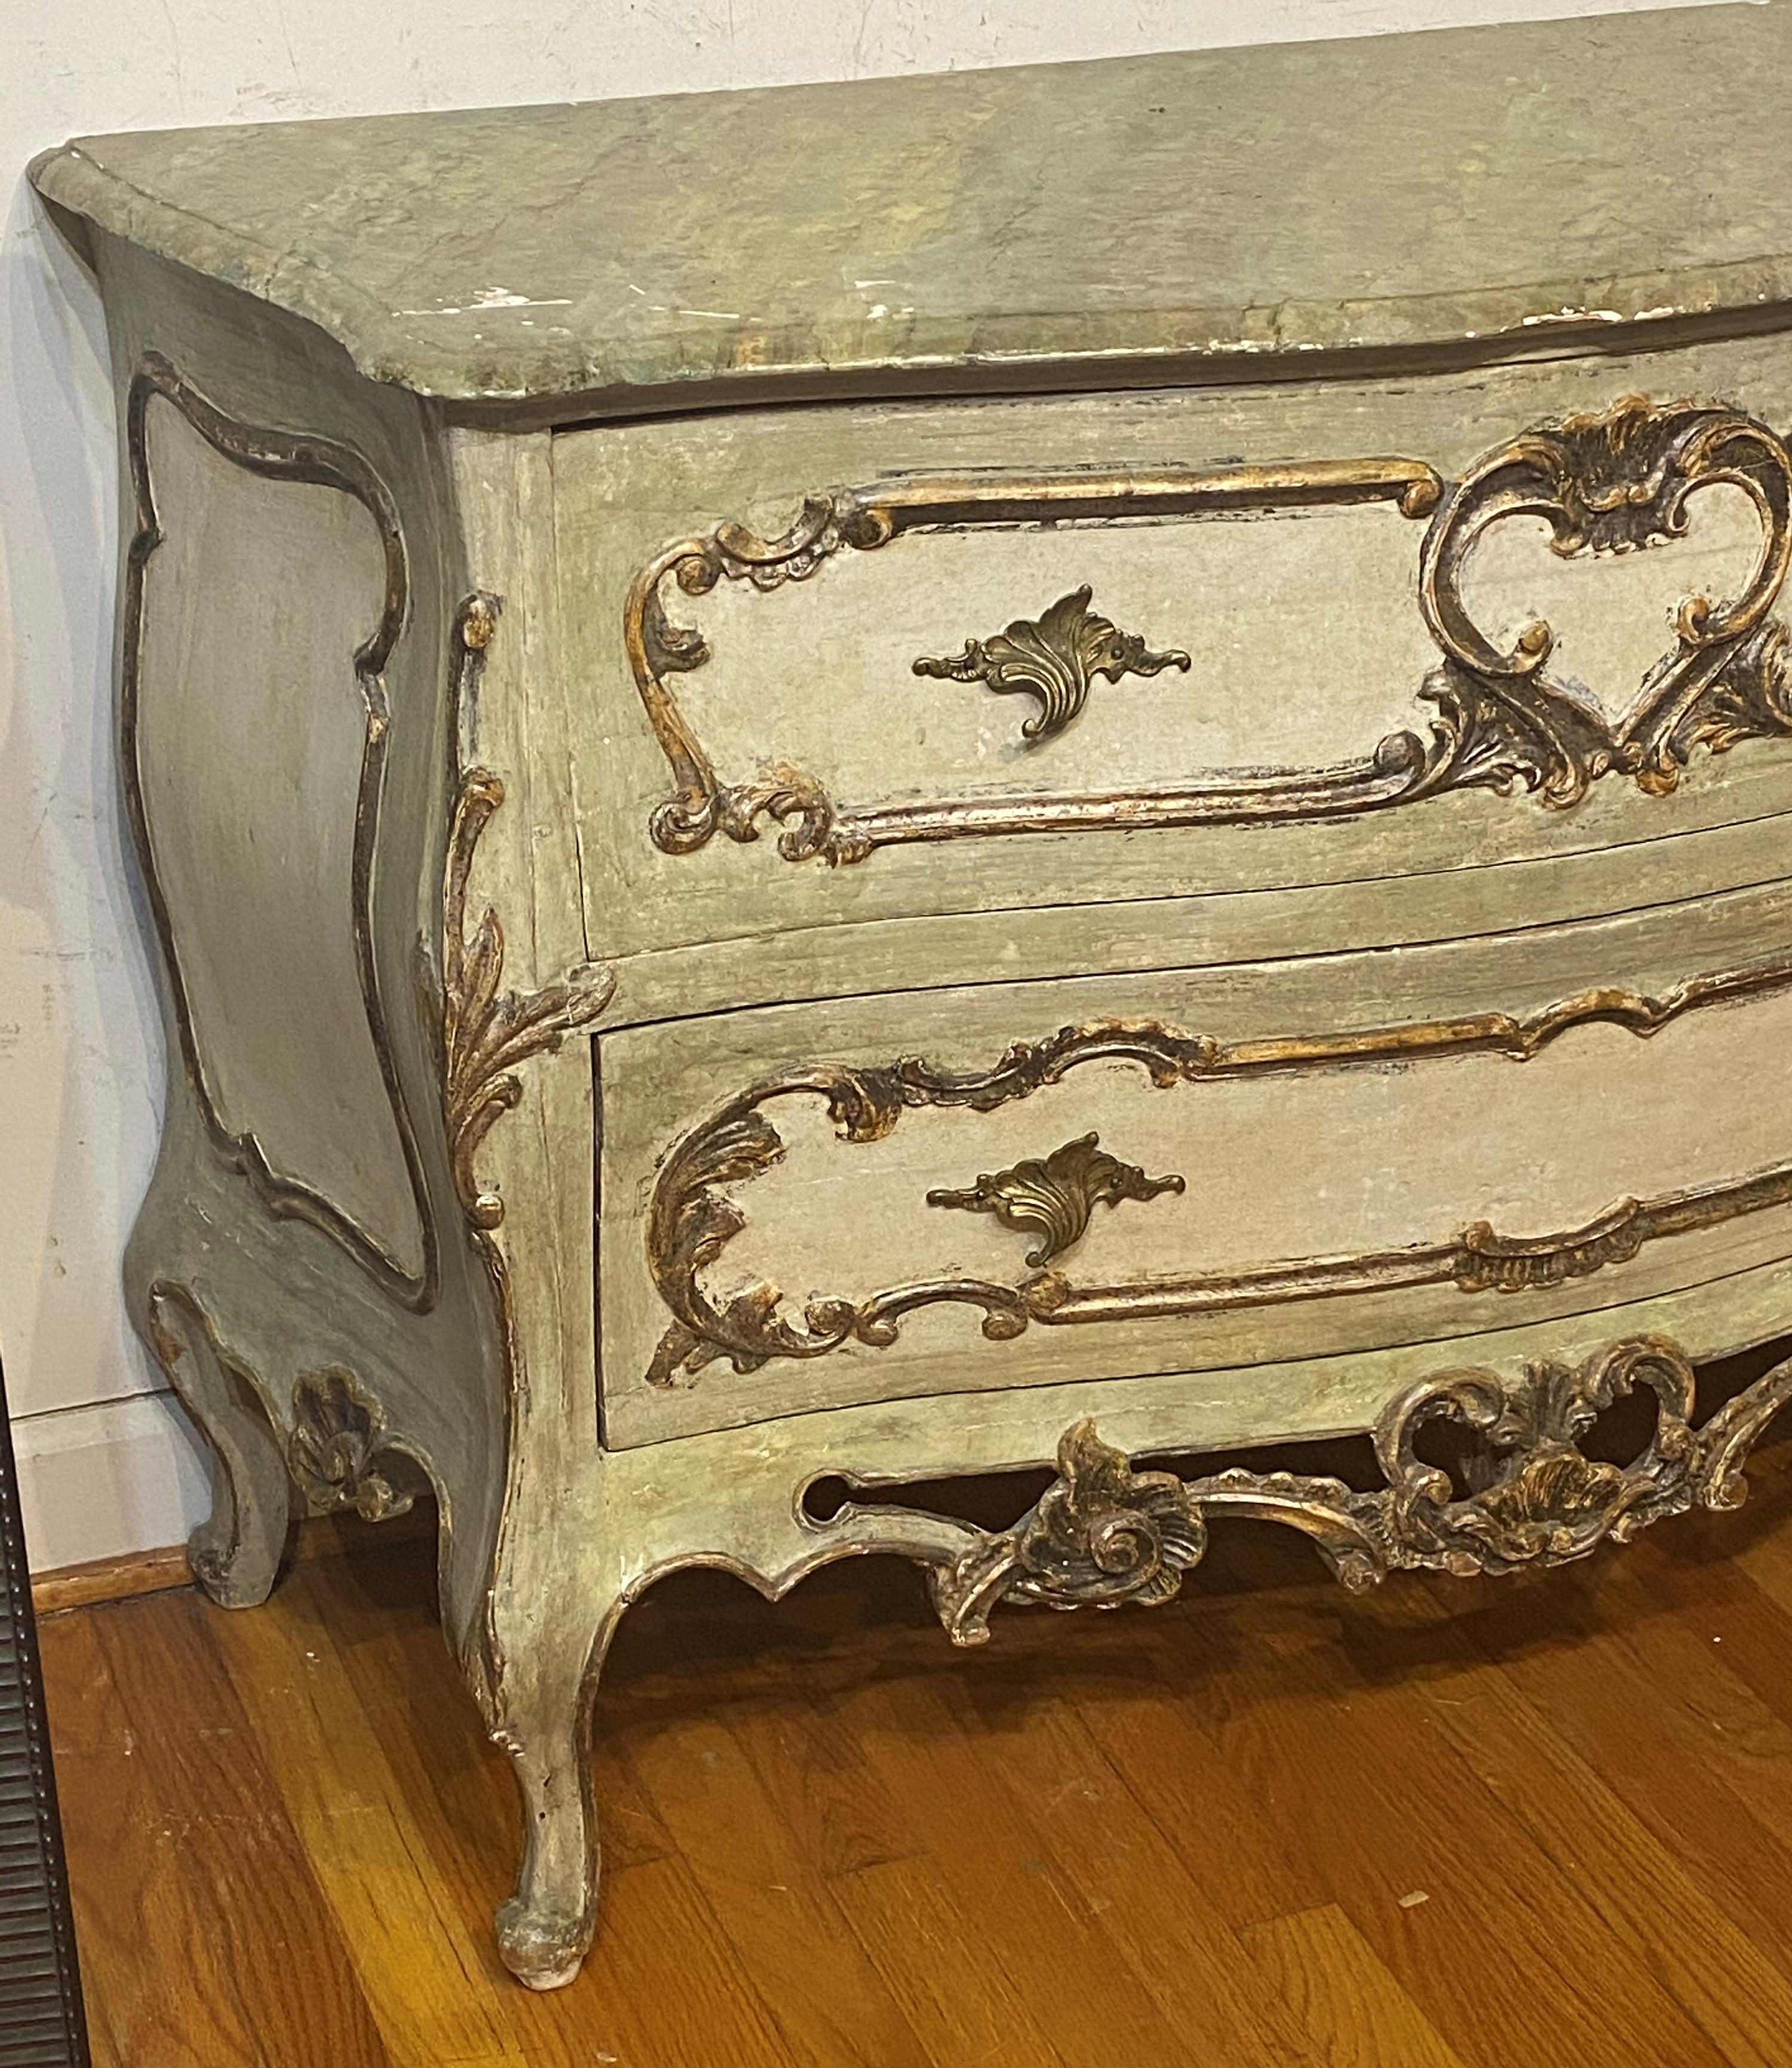 19th C in mid 18th C style, bold painted Italian commode from Venice. Serpentine front and with carved elements.42